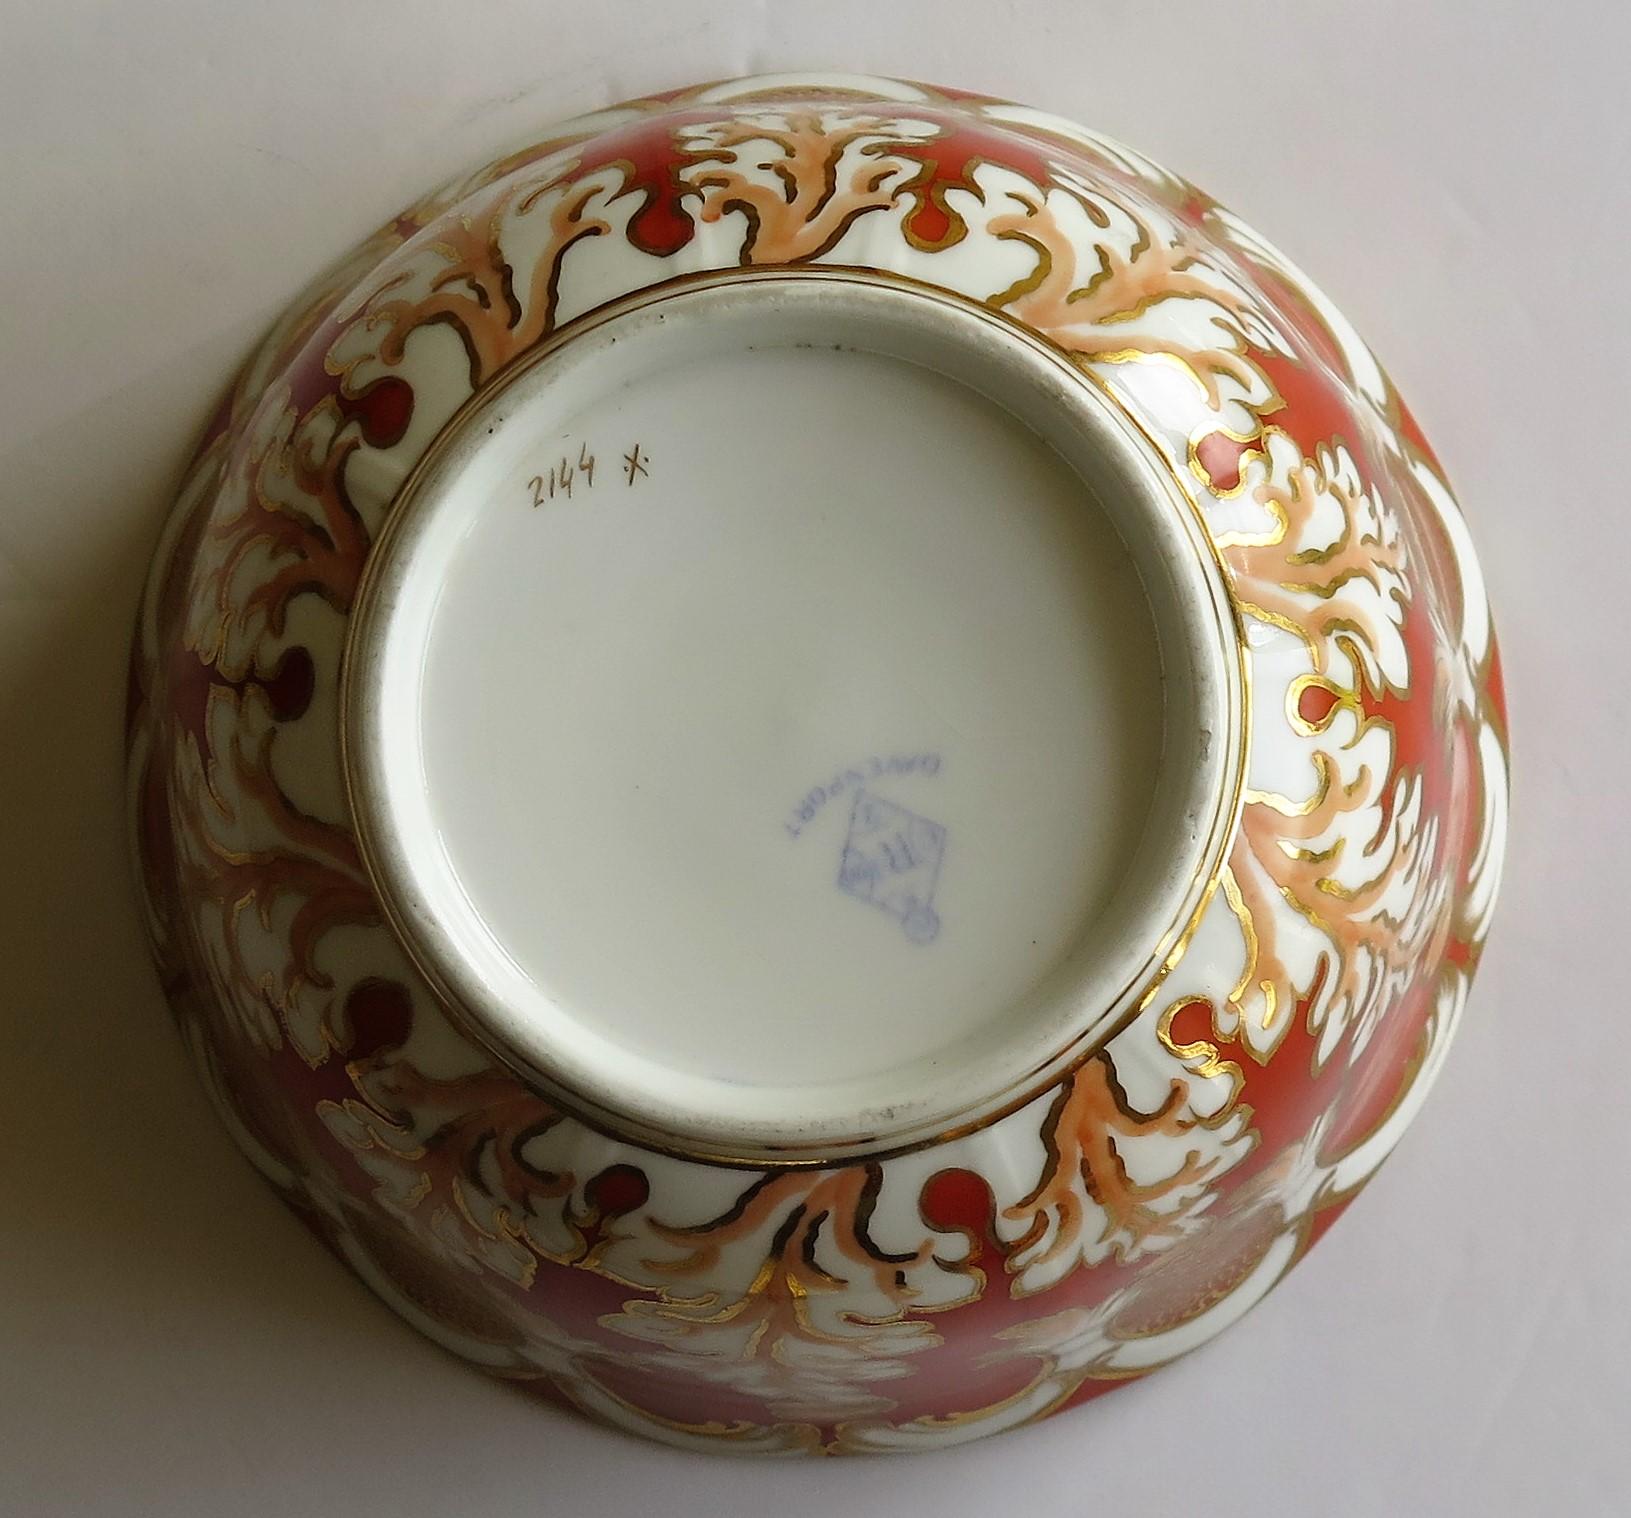 Davenport Porcelain Bowl in Pattern 2144 Fully Marked to Base, English, 1845 9